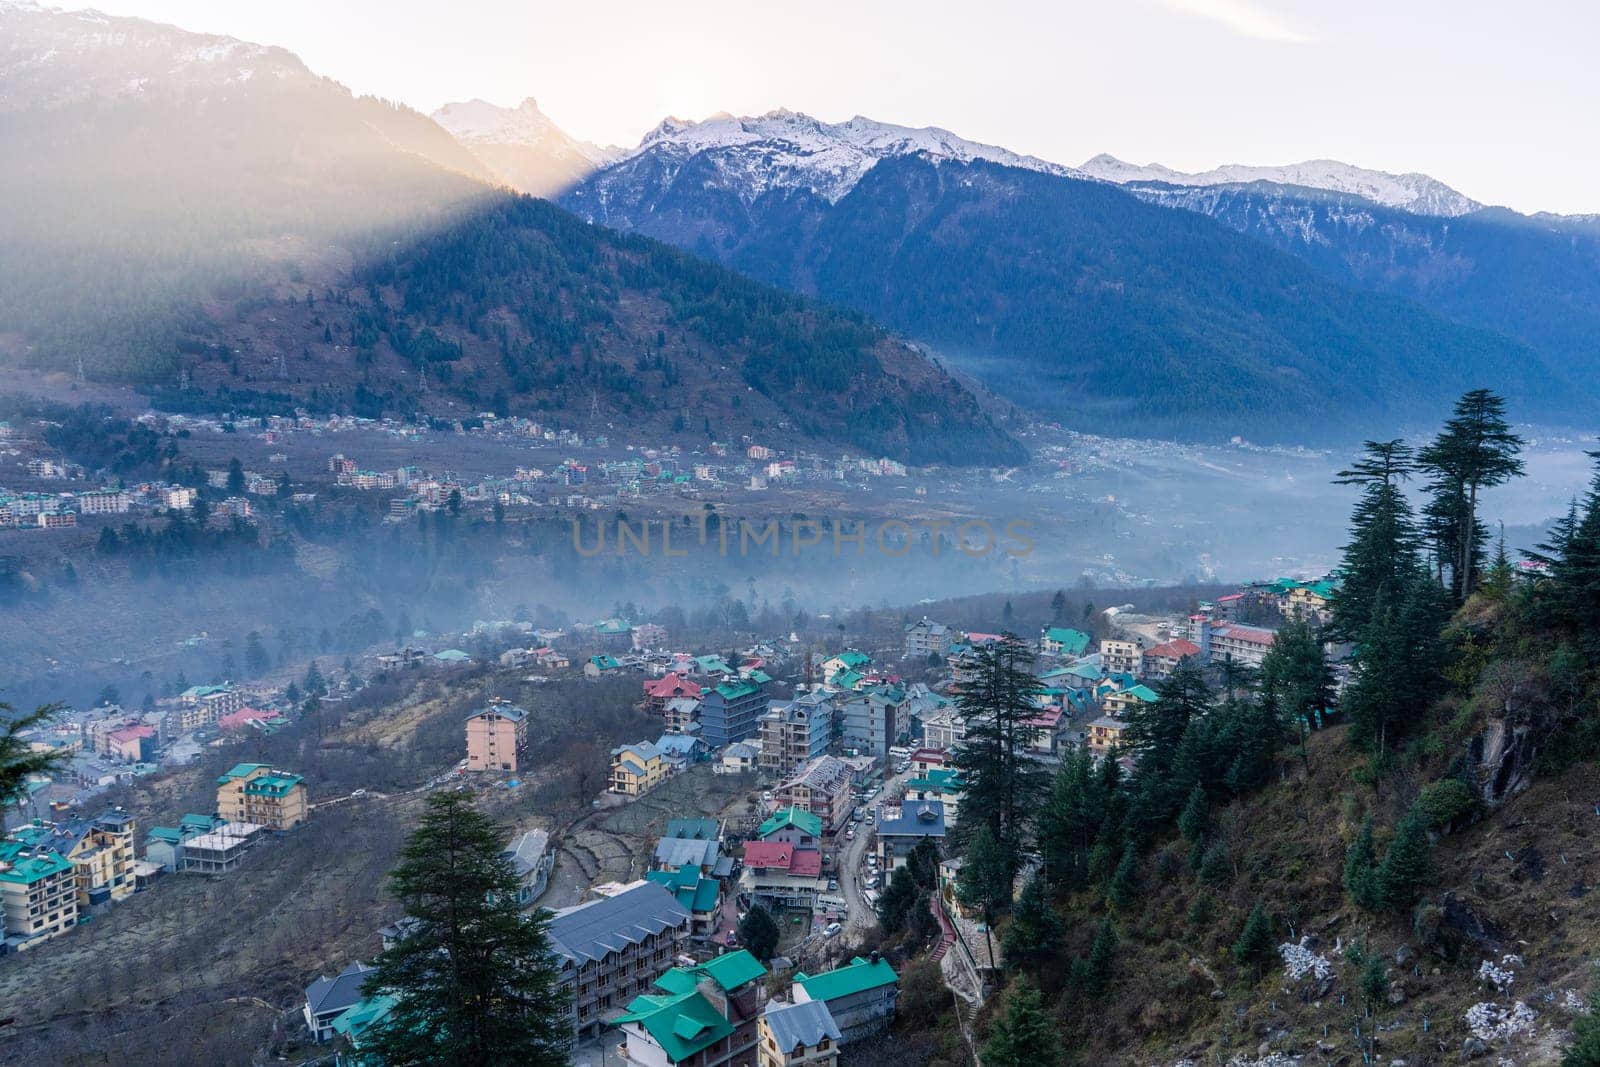 monsoon clouds moving over snow covered himalaya mountains with the blue orange sunset sunrise light with town of kullu manali valley at the base of mountains by Shalinimathur